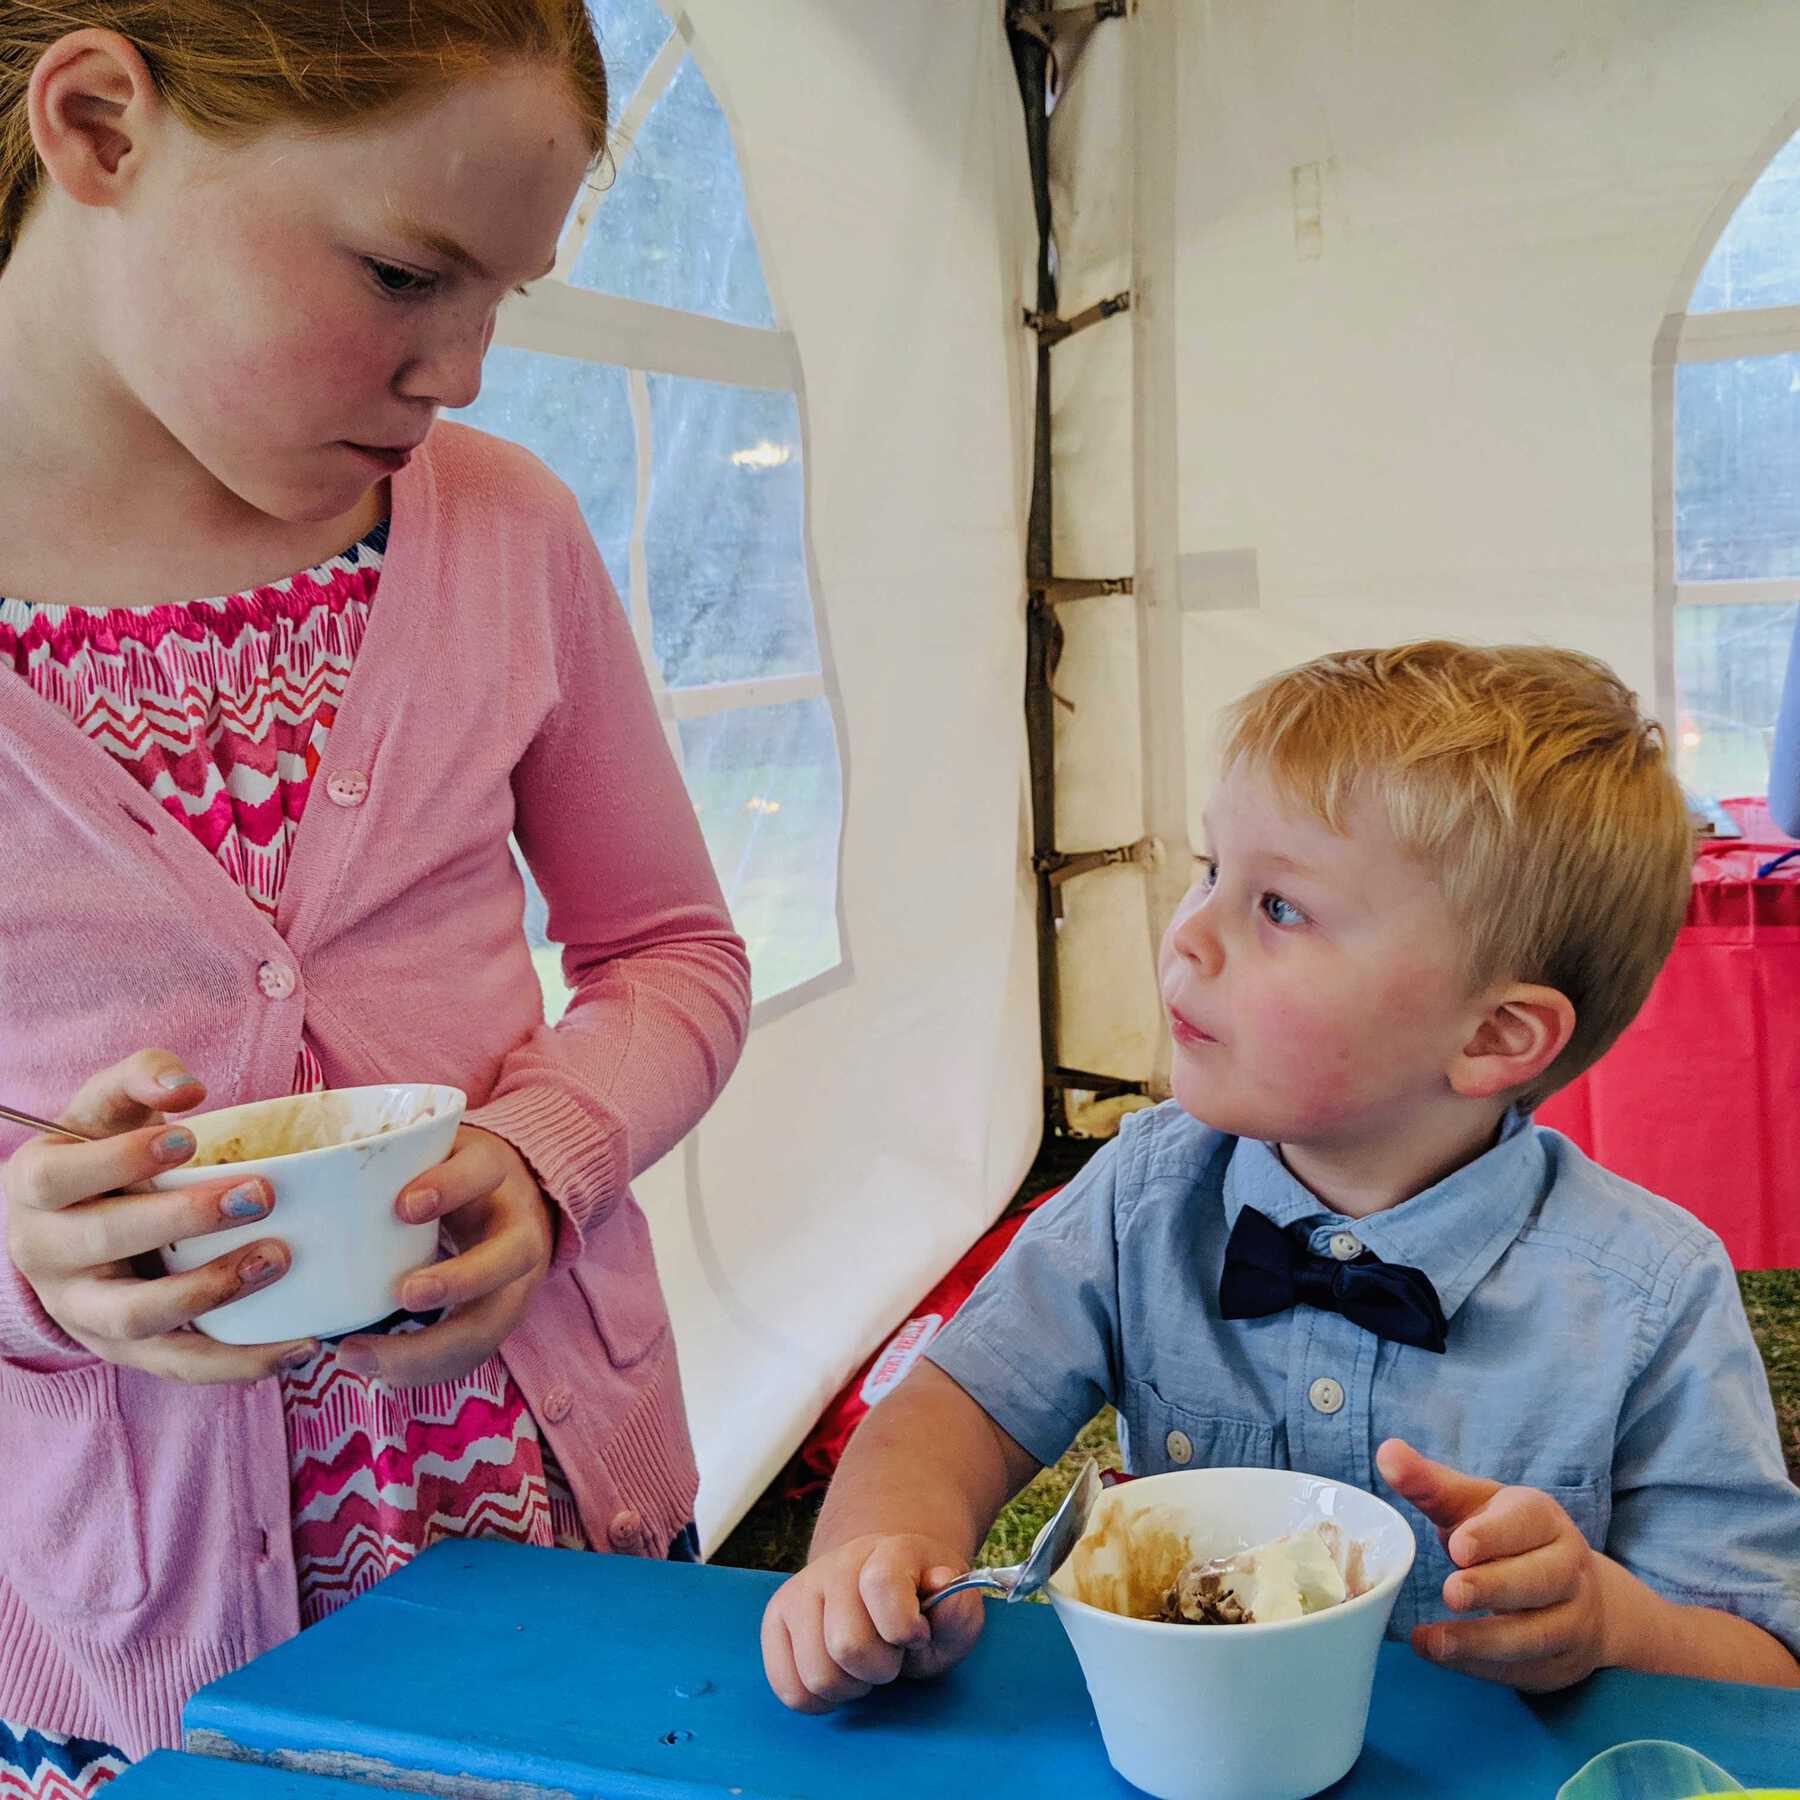 Young boy and girl eating ice cream